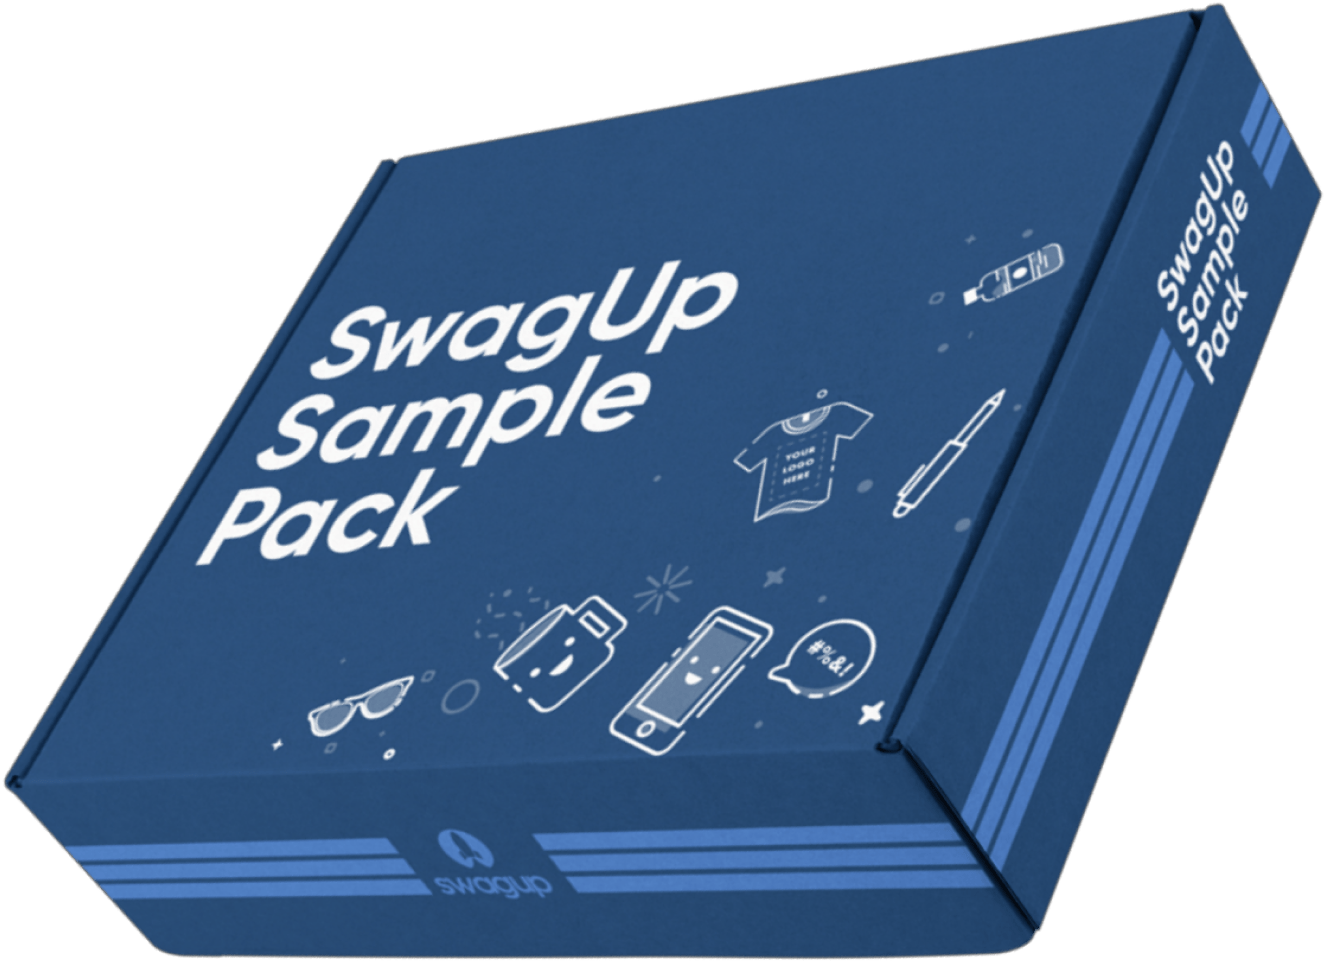 SwagUp Sample Pack